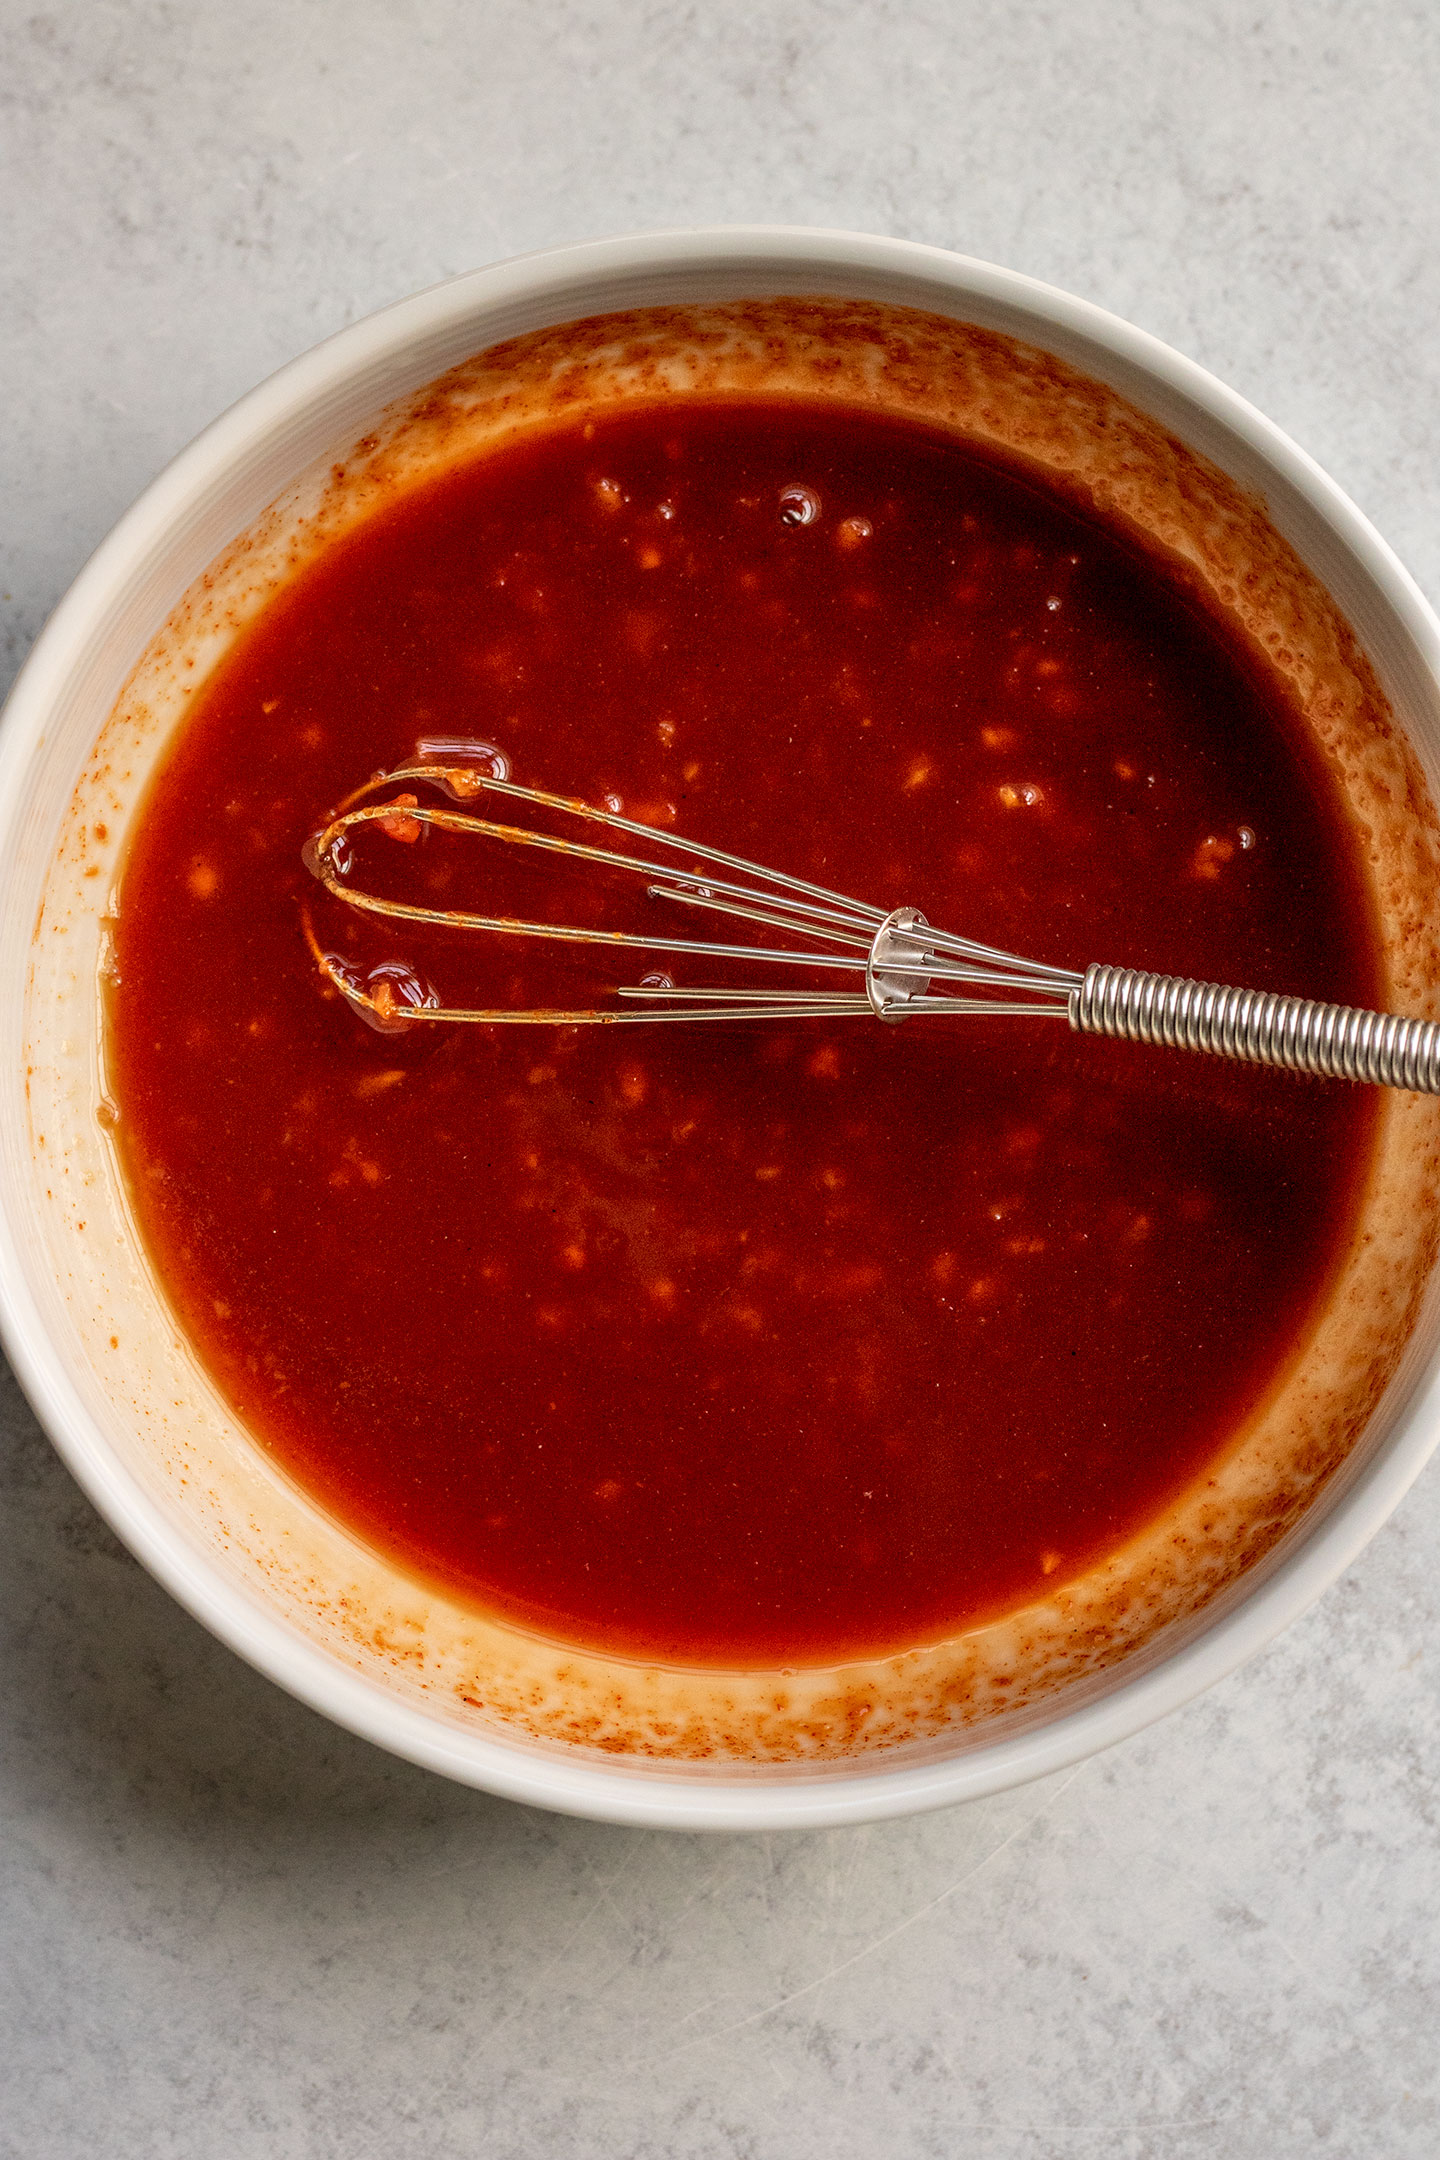 Mixing the gochujang sauce together in a bowl with a small whisk.